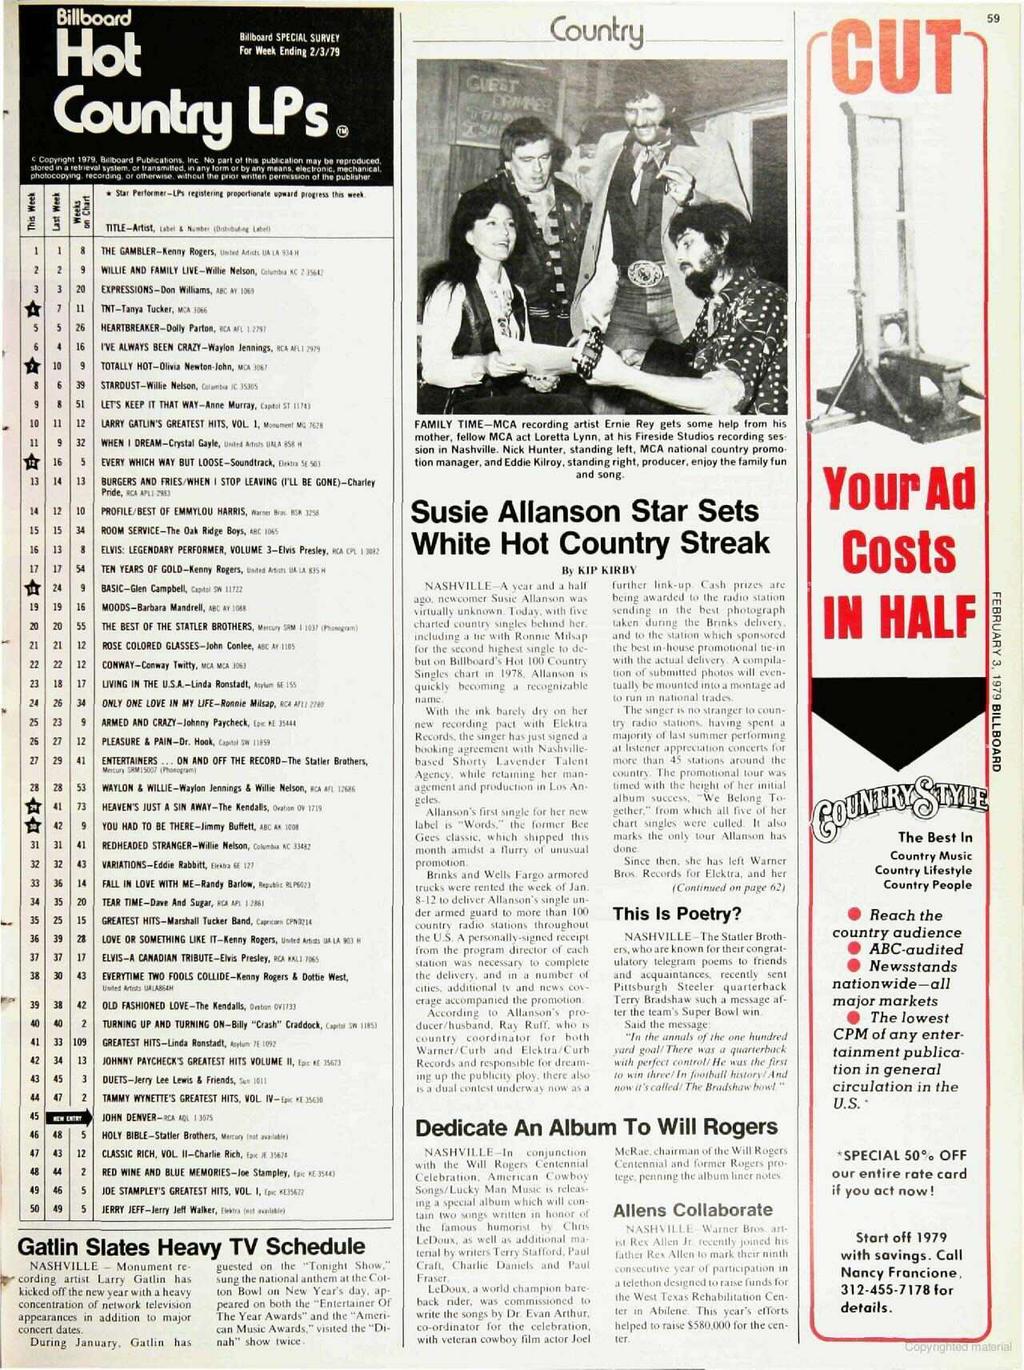 Billboard Hot Billboard SPECAL SURVEY For Week Ending 2/3/79 Country 'CUT 59 Count LPs. c copynghl 1979, Bulboard Publications, nc No part of ha pubhcahon may by. produced. Alo. in a teh,eval system.